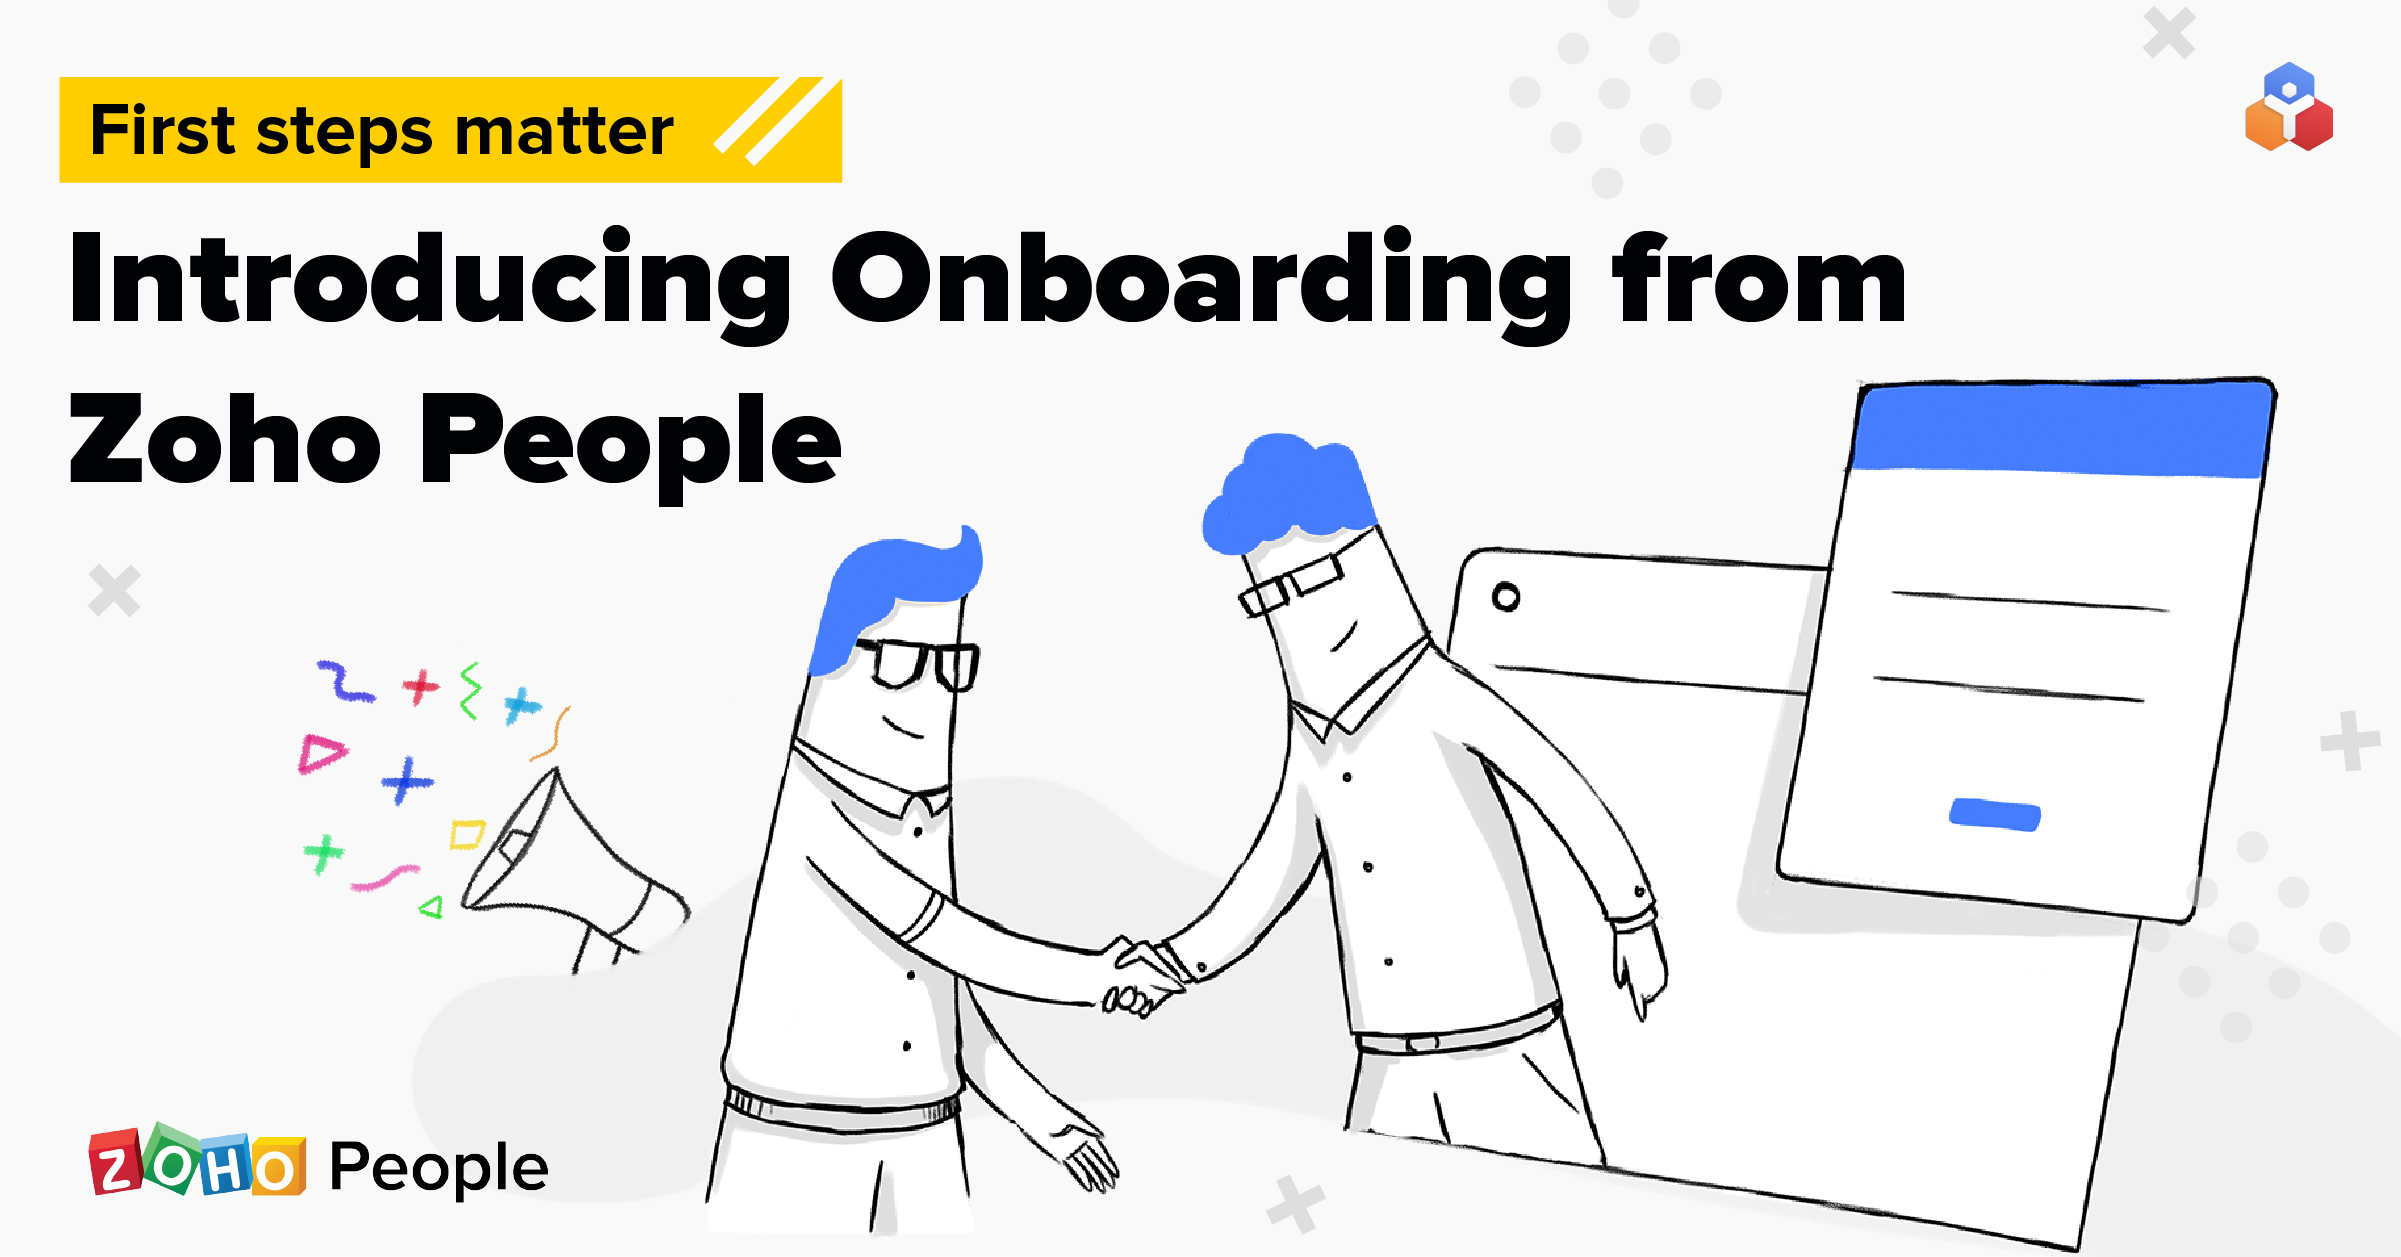 First steps matter. Introducing Onboarding from Zoho People